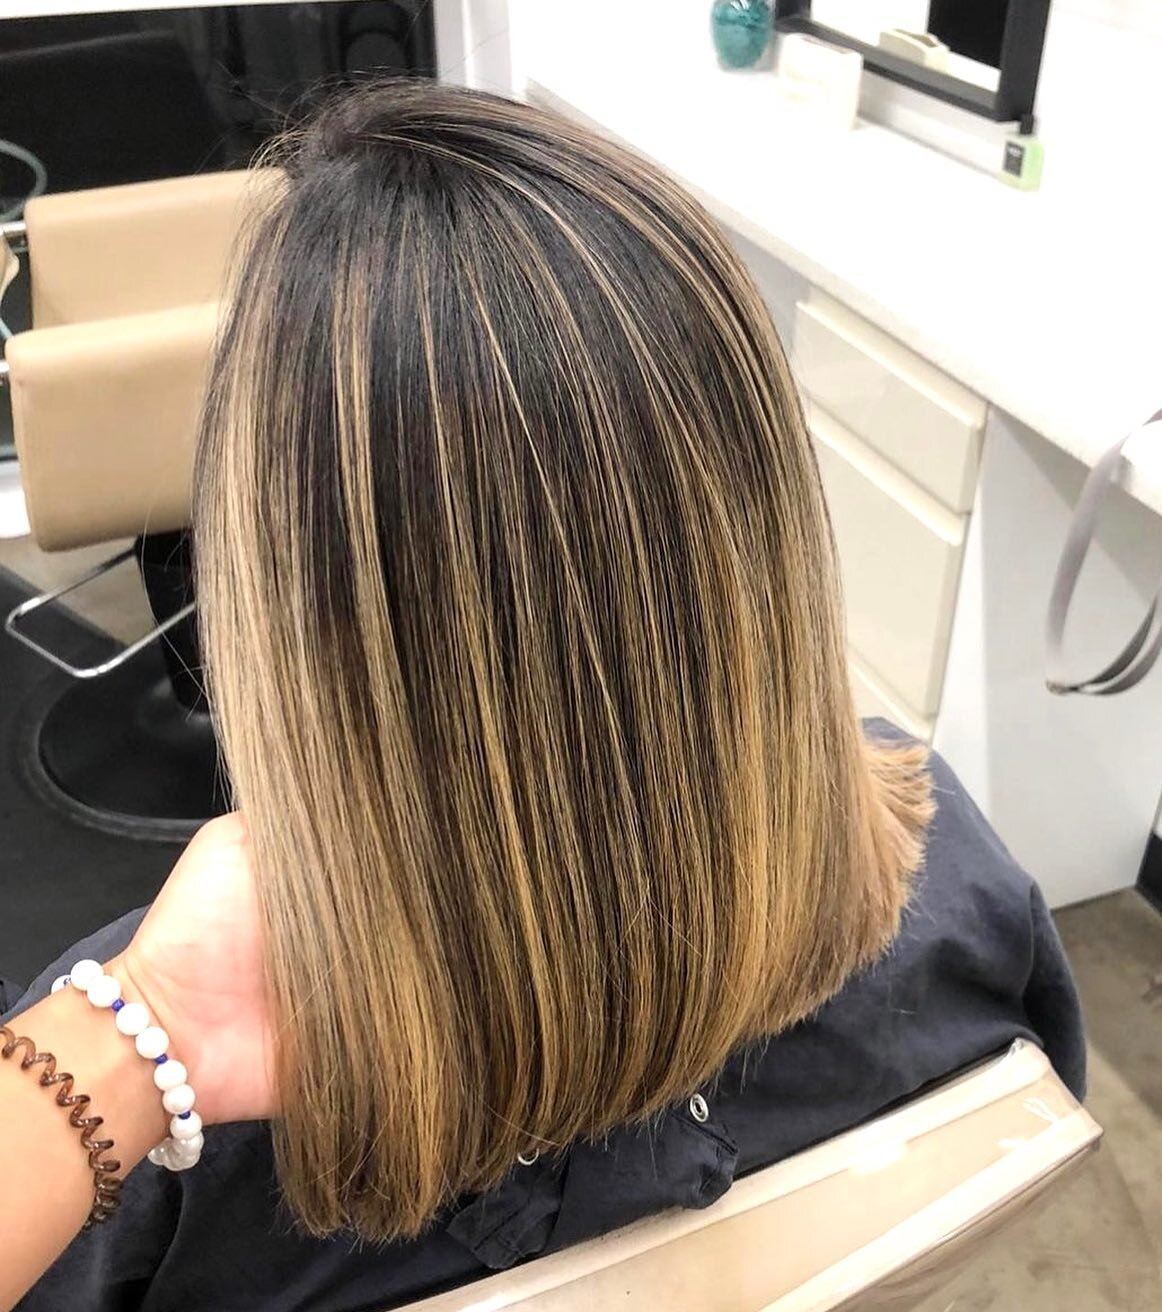 High contrast between colors. #balayage #haircolor #colour #dfwhair #dfwhairstylist #dallashair #dfwhairsalon #dfwhairscene #dallashairstylists #haircut